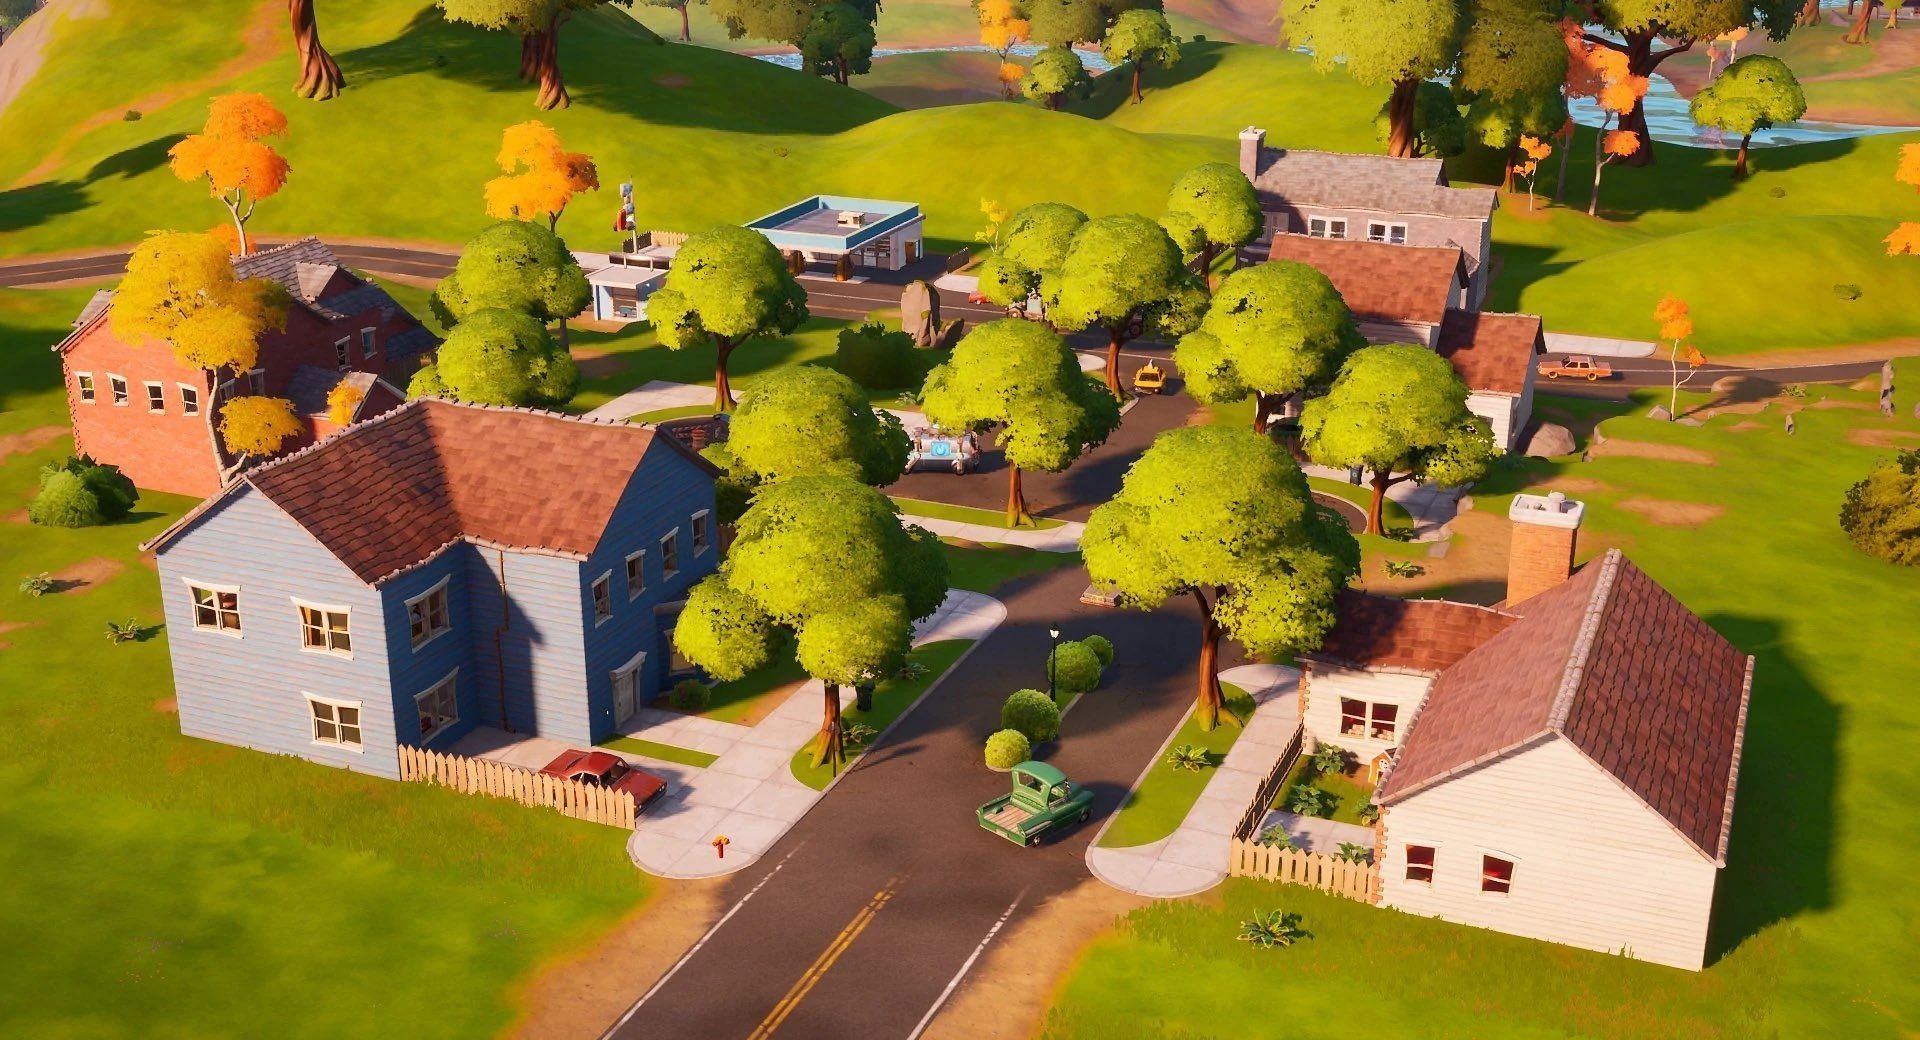 Salty Springs was one of the most sweatiest Fortnite locations (Image via SouthScar/Twitter)